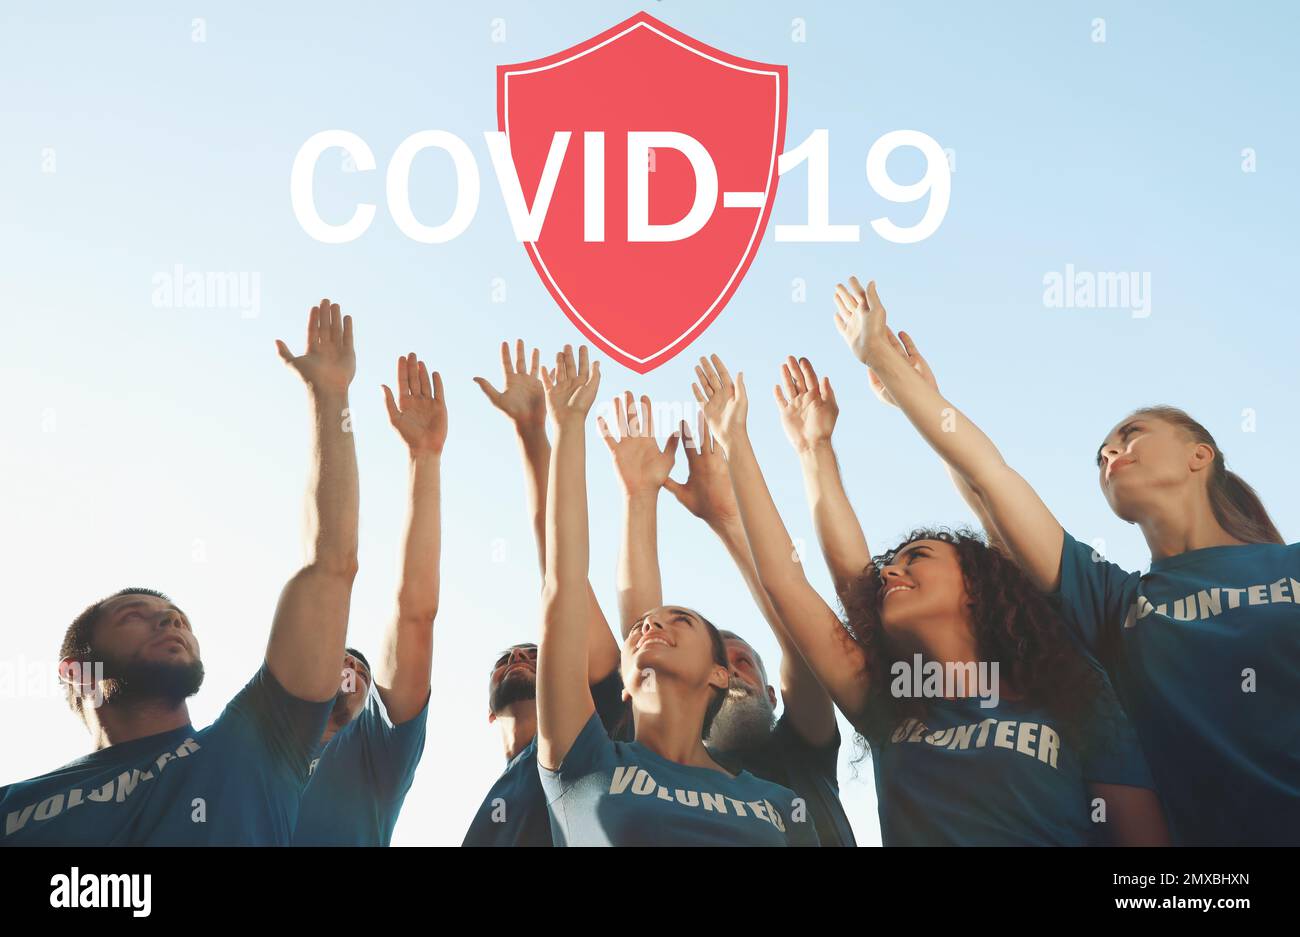 Volunteers uniting to help during COVID-19 outbreak. Group of people raising hands outdoors, shield illustration Stock Photo